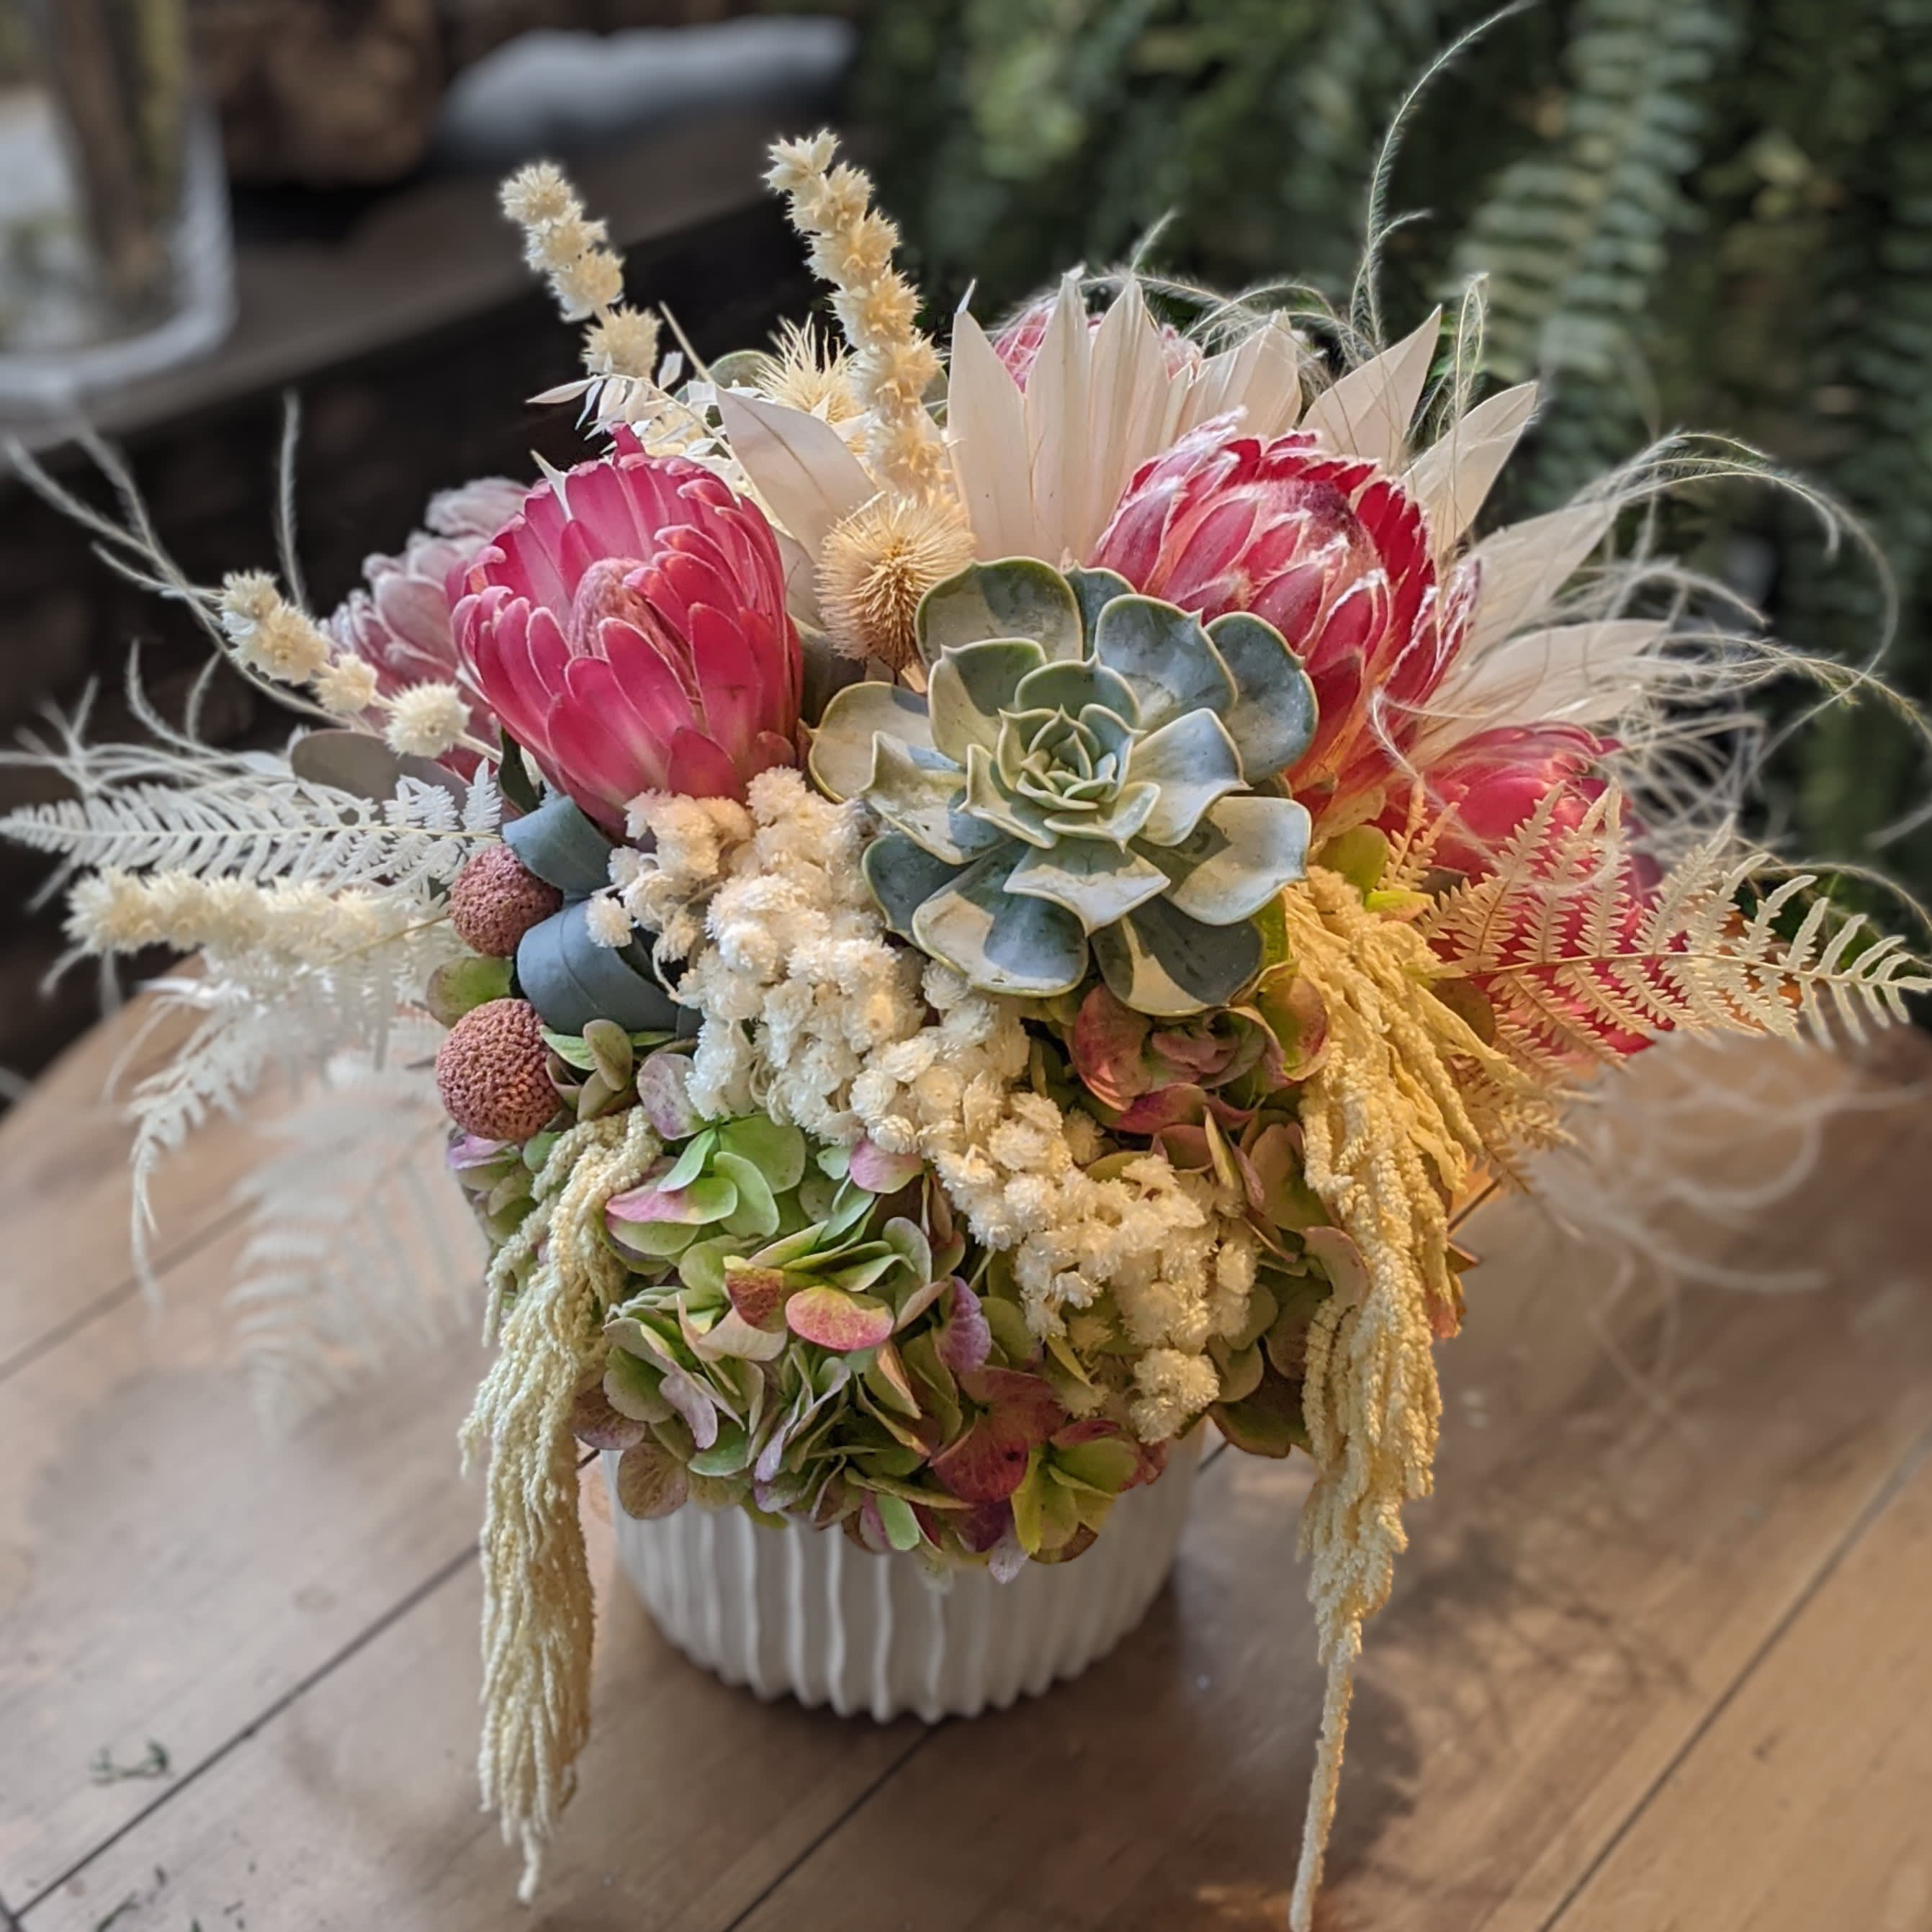 Spectacular Pink Boho Centerpiece - This arrangement features succulents, pink protea, and pink antique hydrangea designed in a wild ,feminine yet natural style. Bleached and preserved palms, bunny tails, hanging Amaranthus , ferns and wildflowers all create a design that is meant to die beautifully, and look great for weeks! 